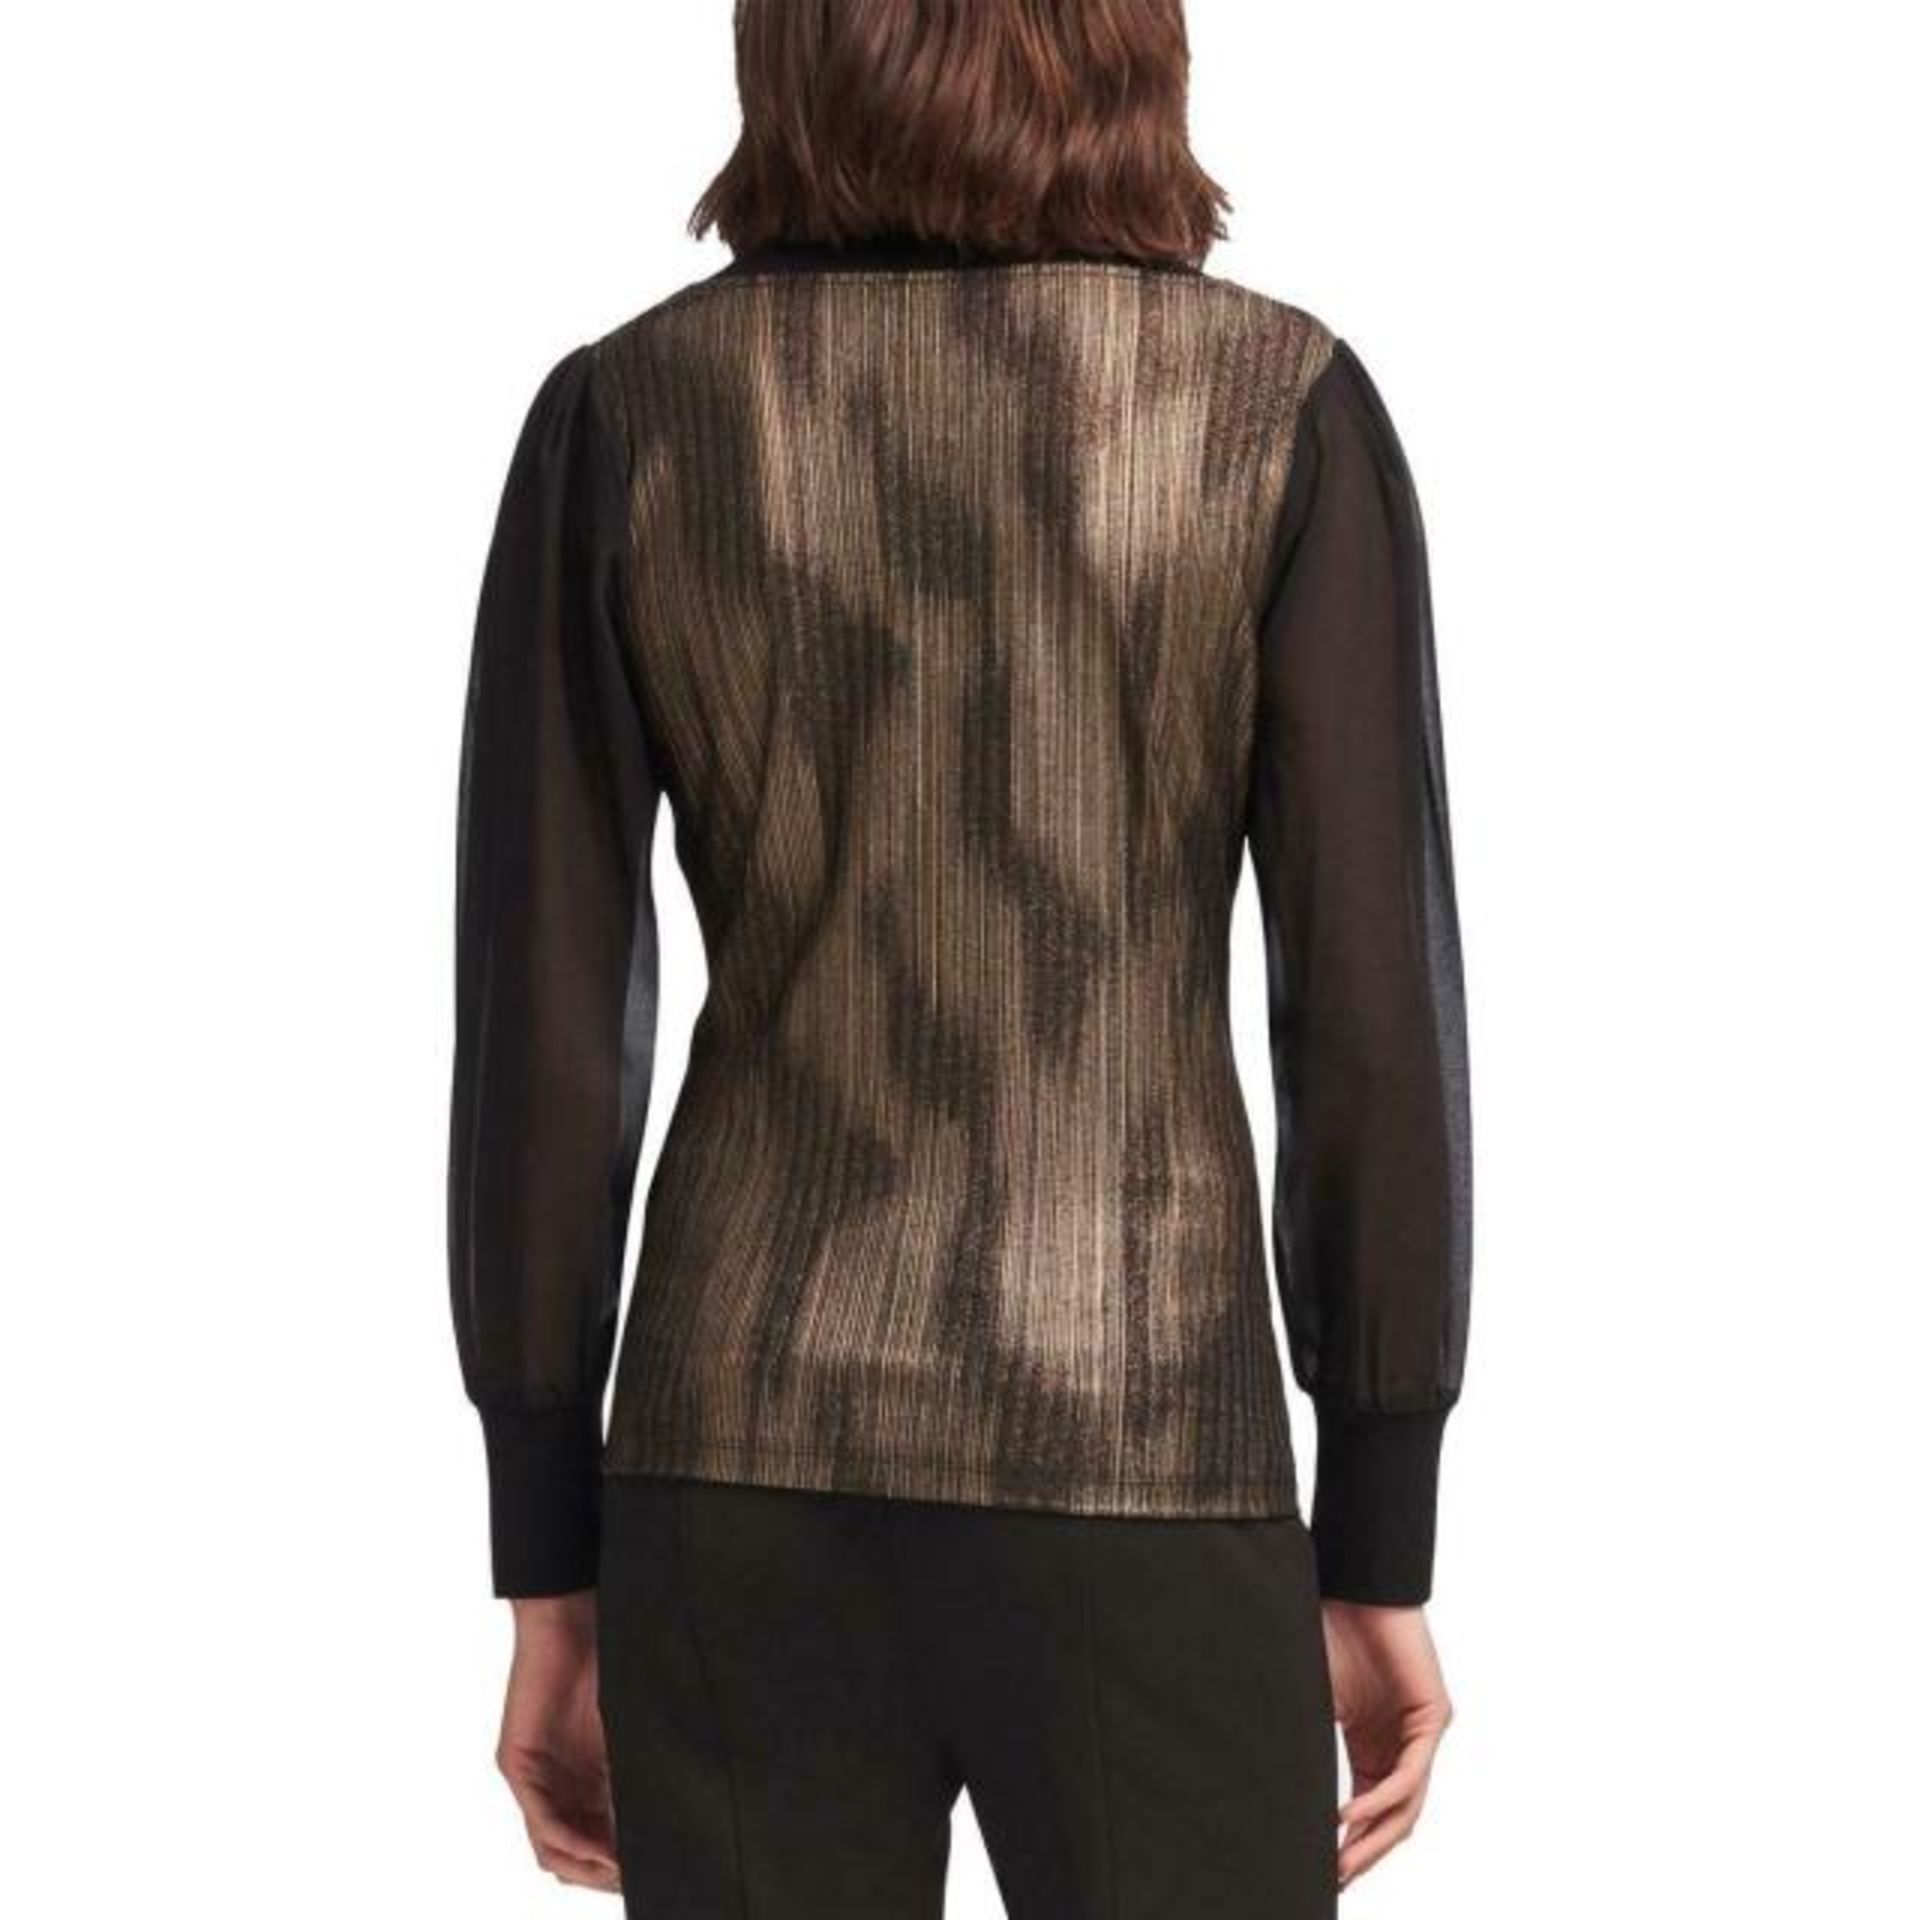 Dkny Womens Black Metallic Crew Neck Long Sleeves Blouse Top Size - S, RRP £365 - Image 2 of 2